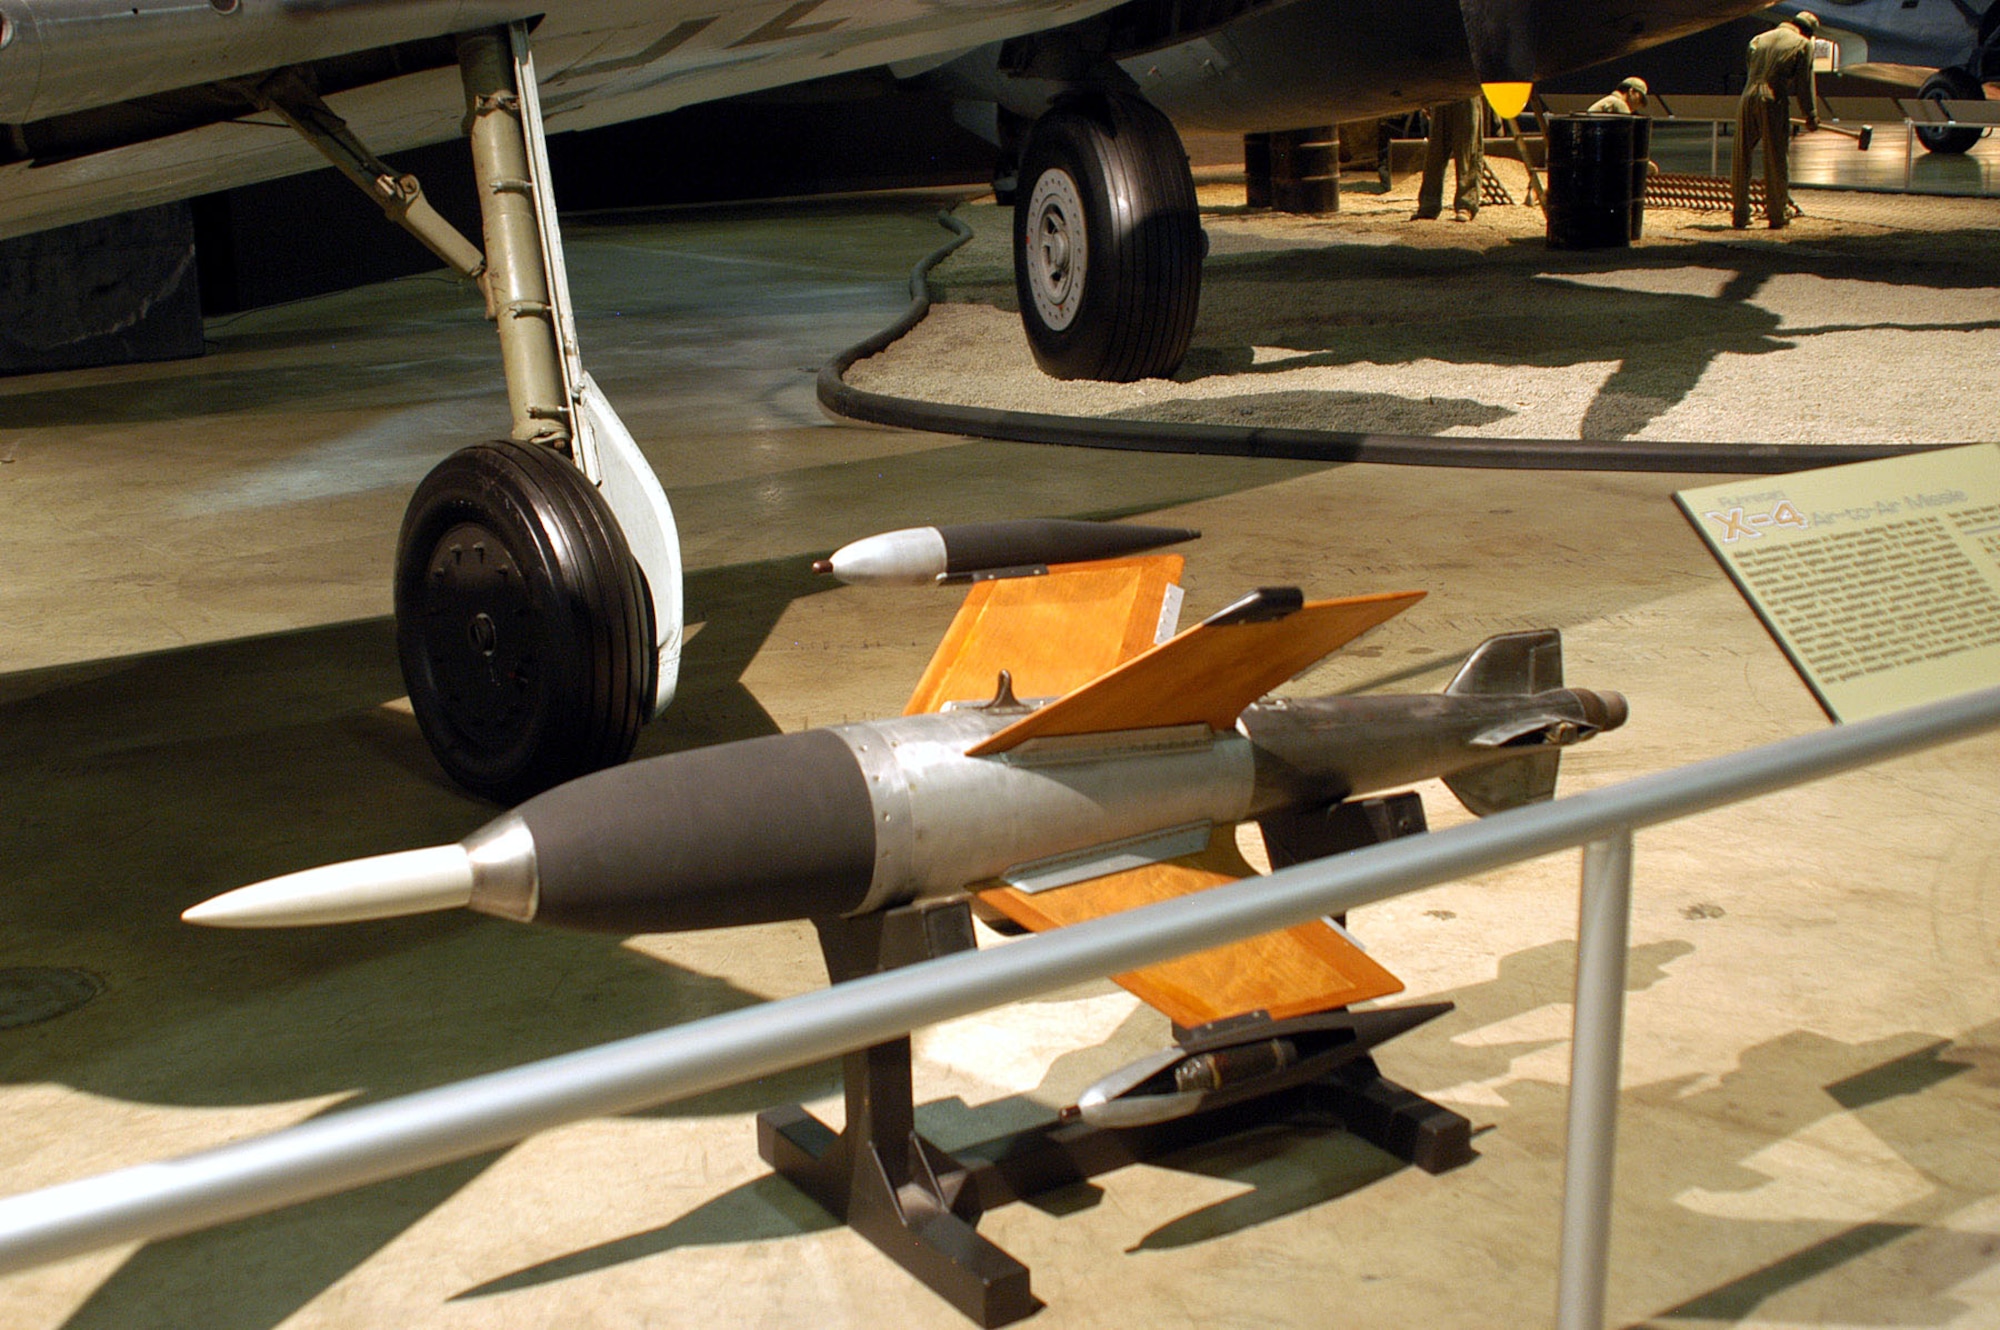 DAYTON, Ohio -- Ruhrstahl X-4 air-to-air missile on display in the World War II Gallery at the National Museum of the United States Air Force. (U.S. Air Force photo)